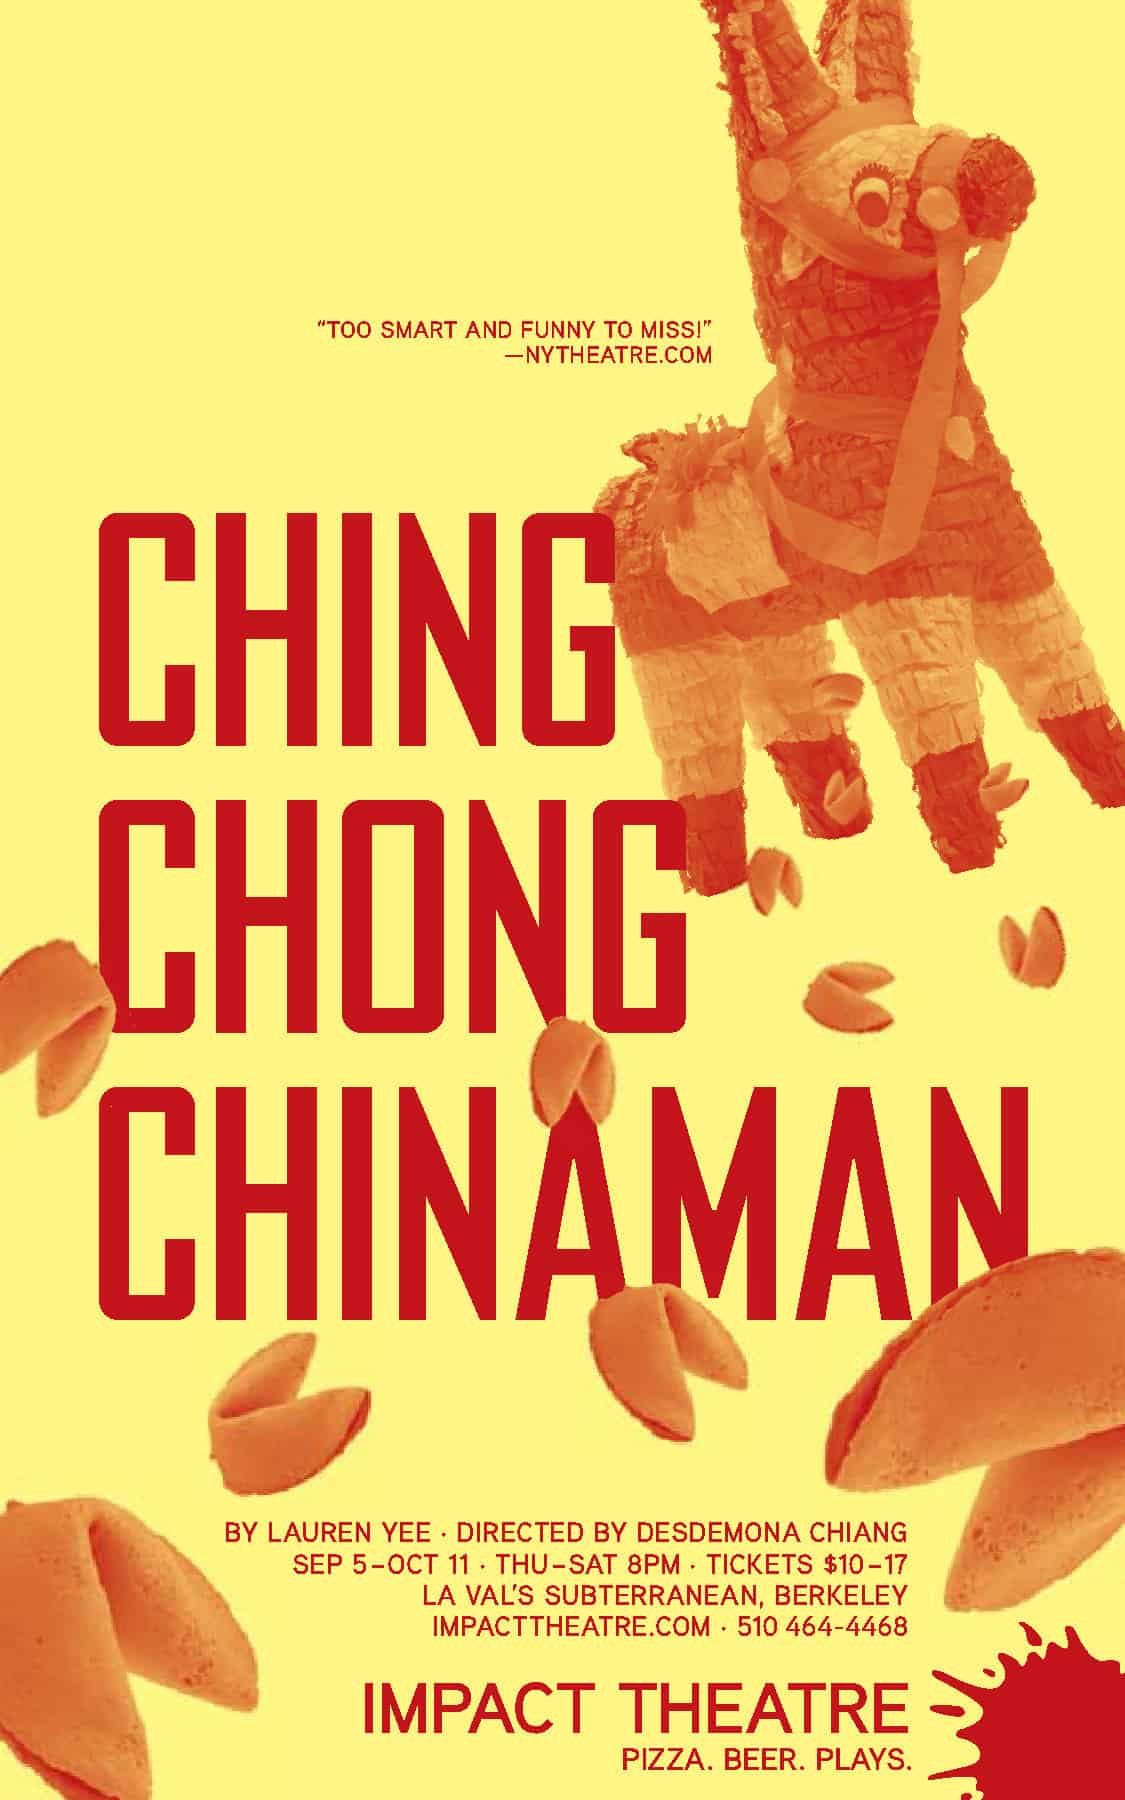 Poster for Lauren Yee's debut play "Ching Chong Chinaman" at Impact Theatre. The image is a surprised-looking donkey piñata that is spewing fortune cookies from its belly.